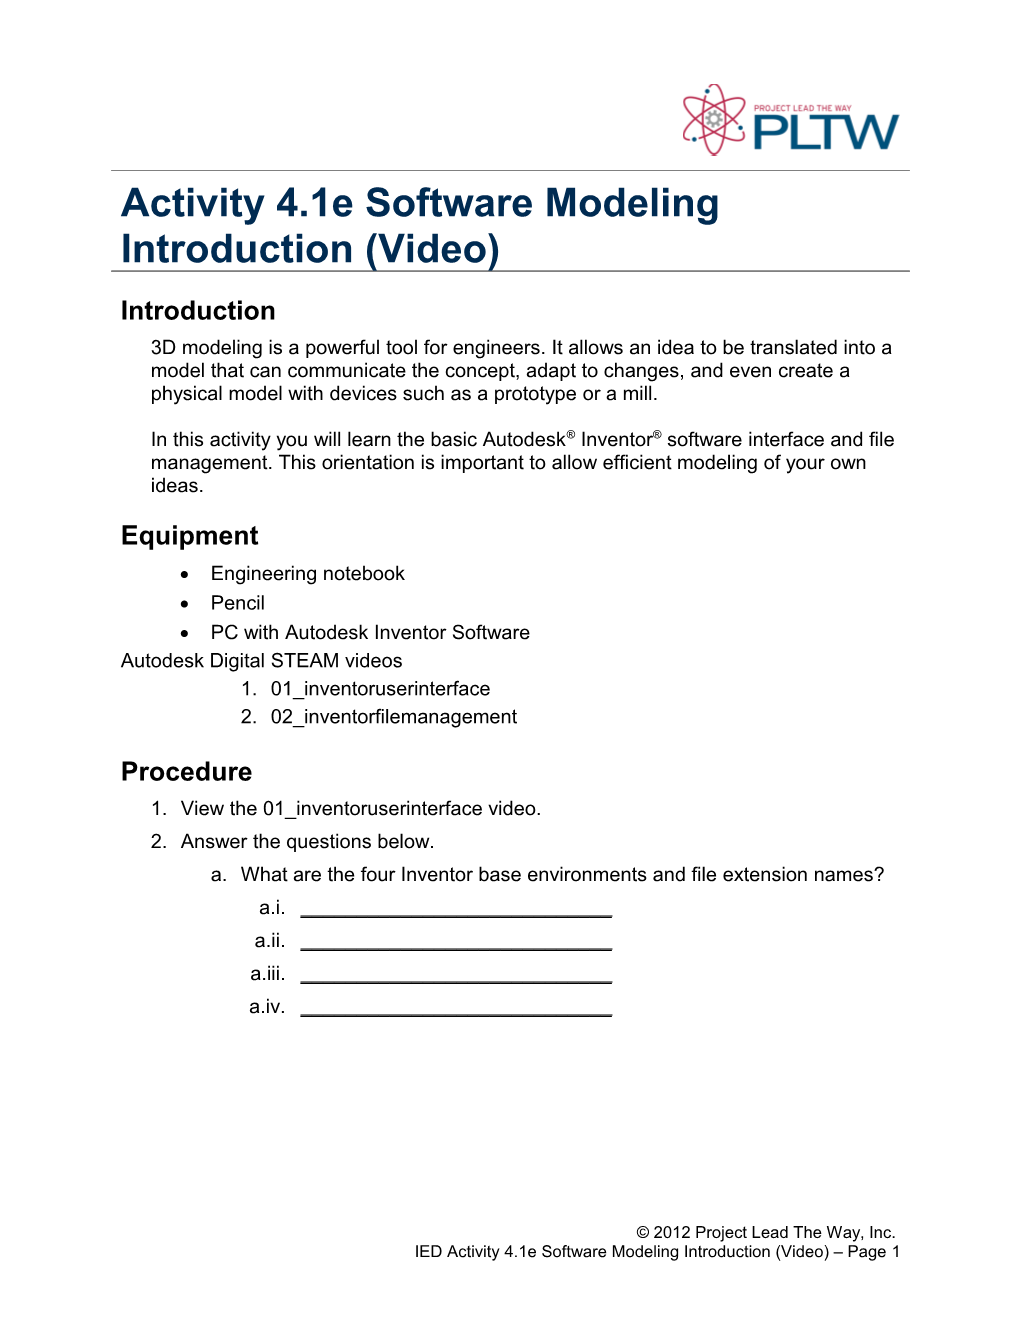 Activity 4.1E Software Modeling Introduction (Video)